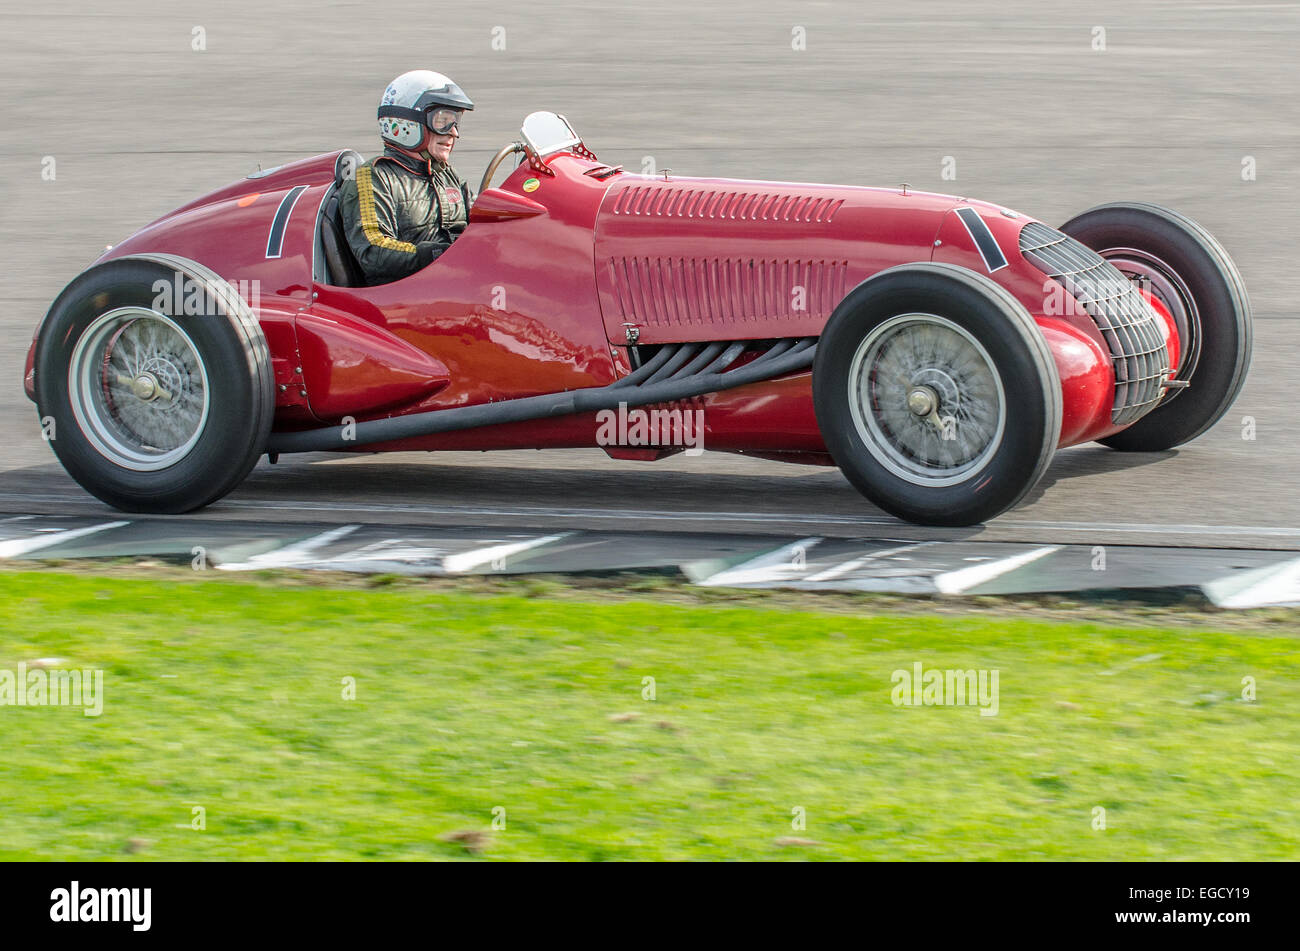 Alfa Romeo 308 or 8C-308 is a Grand Prix racing car made for the 3 litre class in 1938, only four cars were produced. Racing at Goodwood Revival Stock Photo